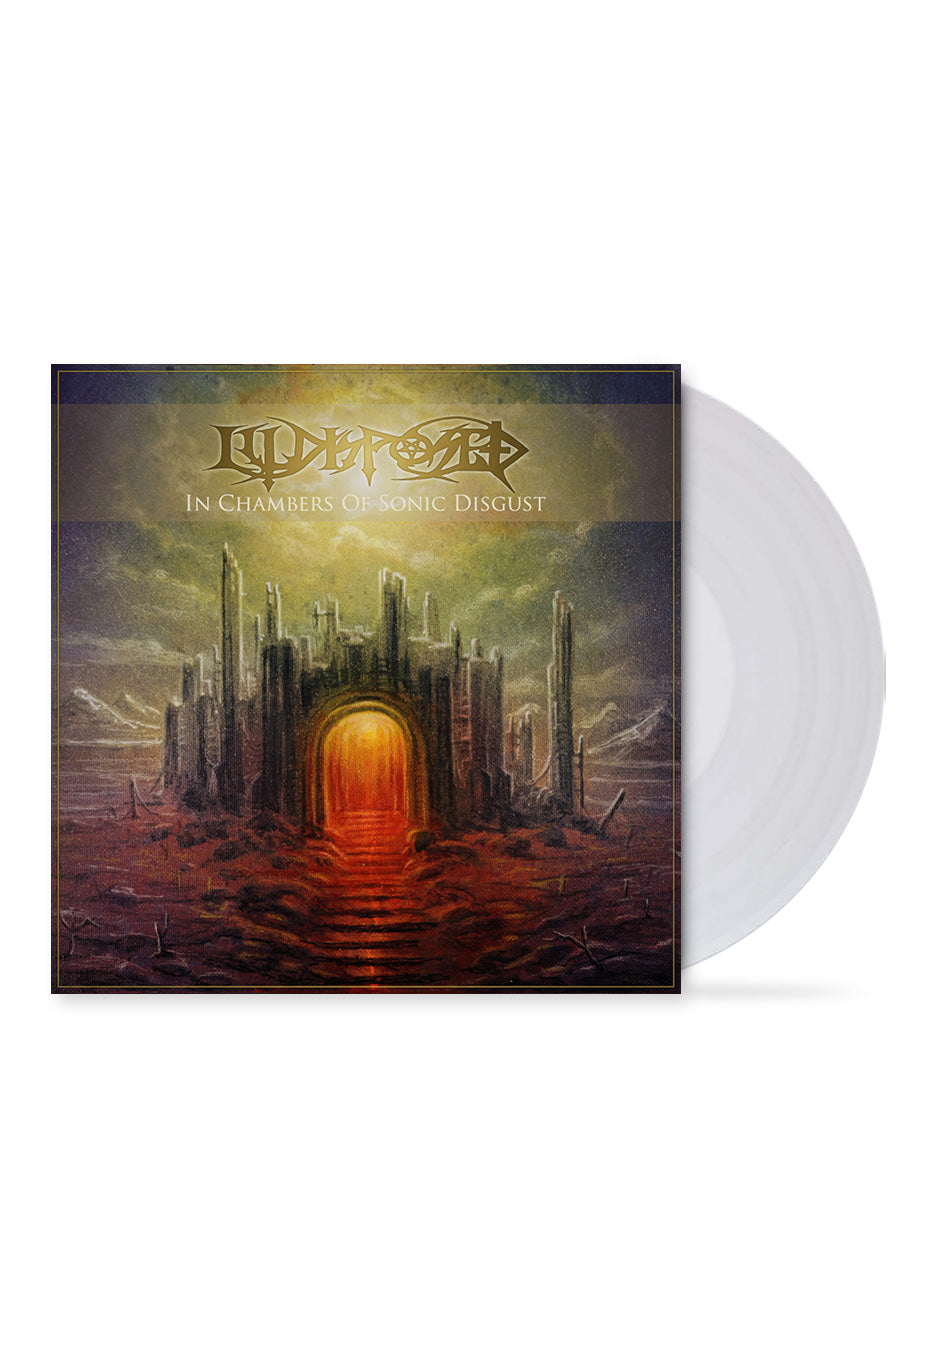 Illdisposed - In Chambers Of Sonic Disgust Ltd. Clear - Colored Vinyl